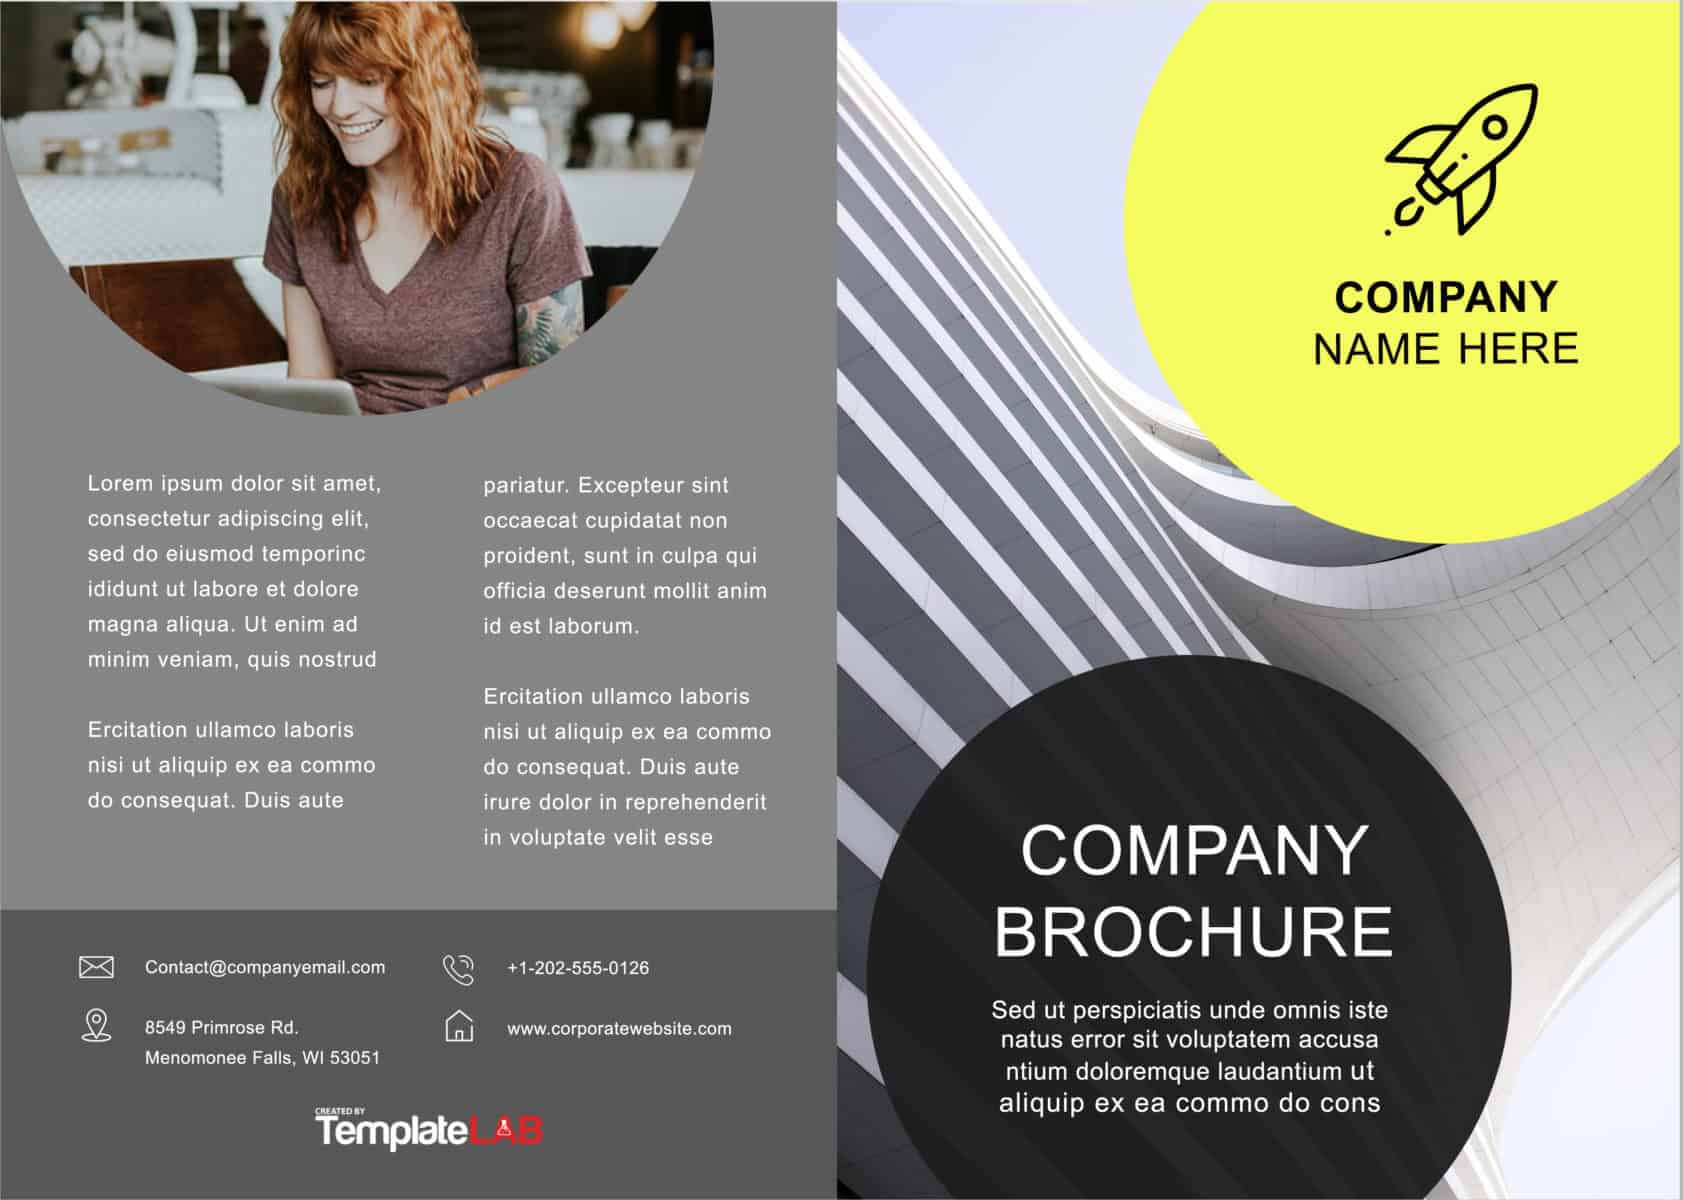 brochure templates for word 2010 free